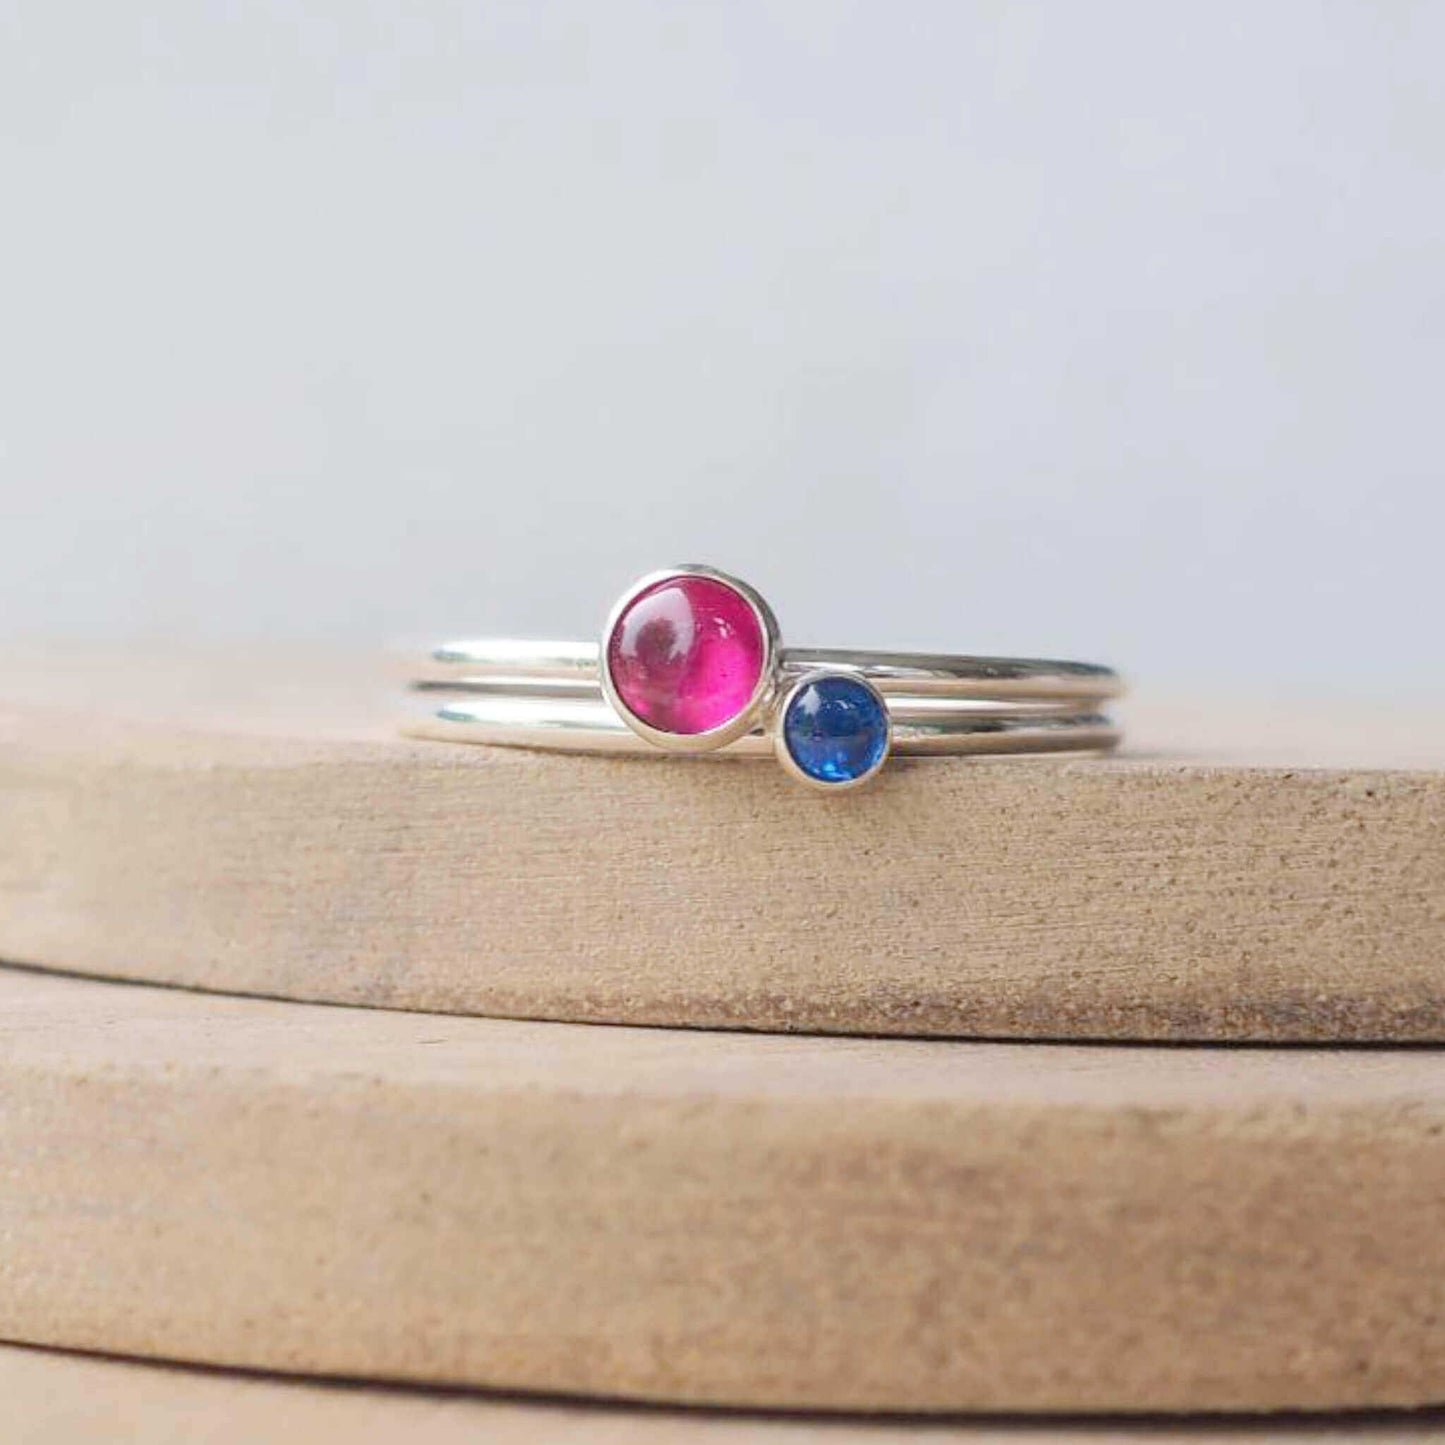 Two silver ring set with round stones. Simple round bands with a 5mm pinky red lab Ruby and a 3mm blue Lab Sapphire. Rings are pictured on wood background. Handmade by Maram Jewellery in Scotland